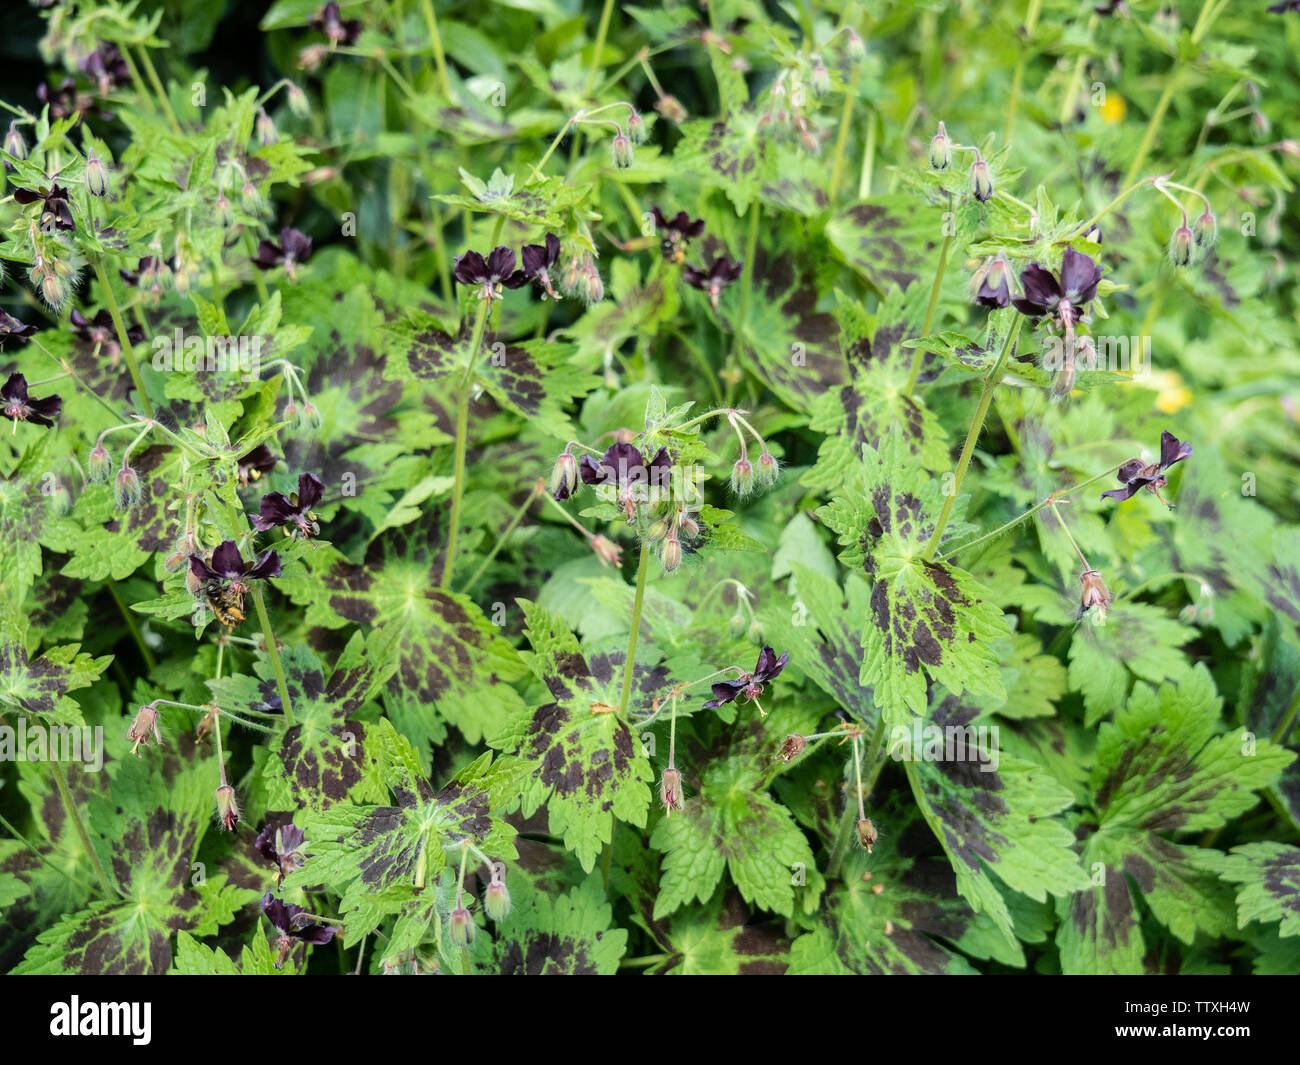 A clump of Geranium phaeum Samobor showing the chocolate coloured flowers and the matching banding on the leaves Stock Photo